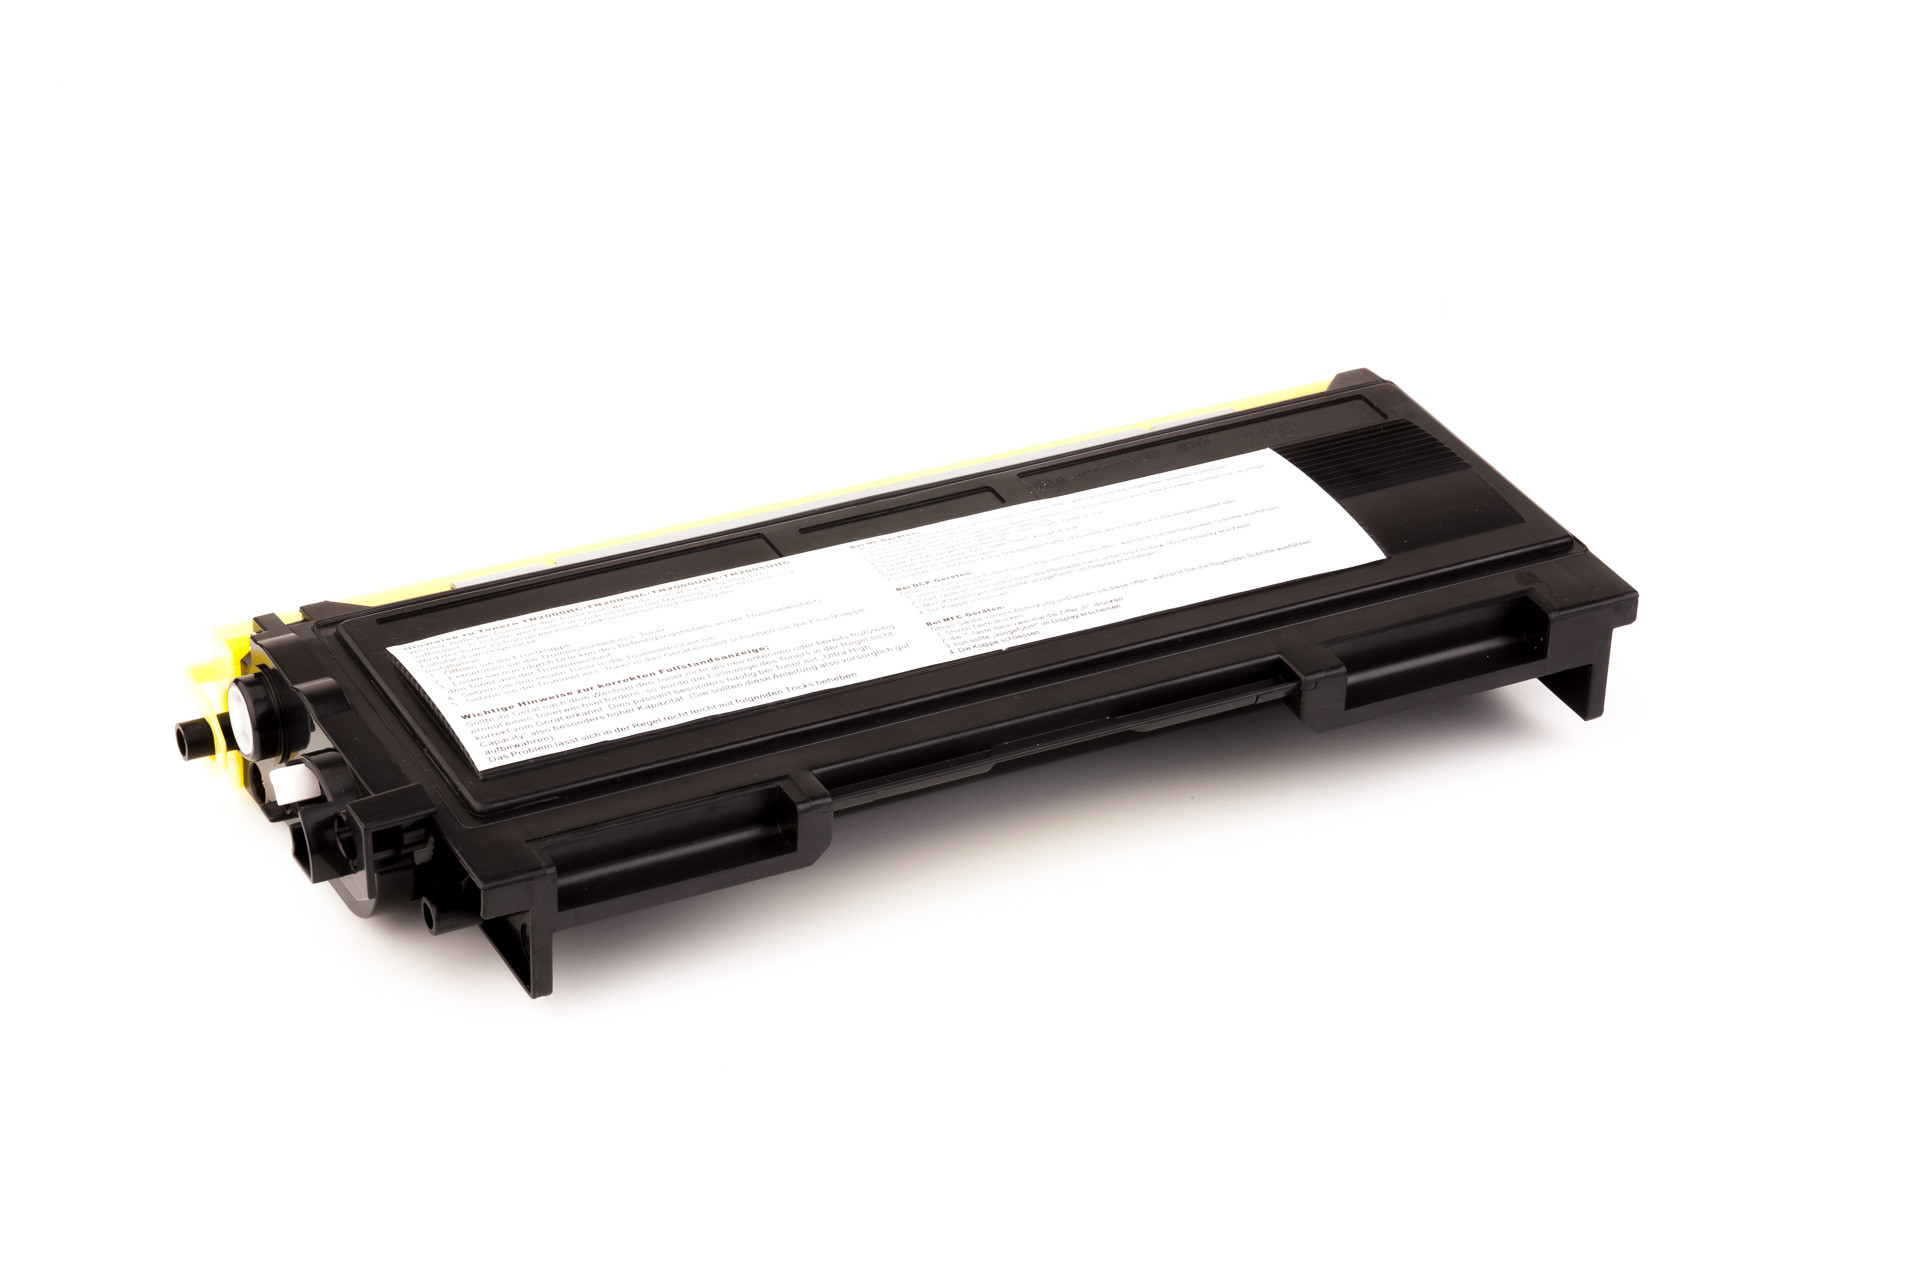 Toner cartridge (alternative) compatible with Brother - TN2000 / TN 2000 - for HL 2030/2020/2040/2032/2050/2070 N/MFC 7220/7225 N/7420/7820